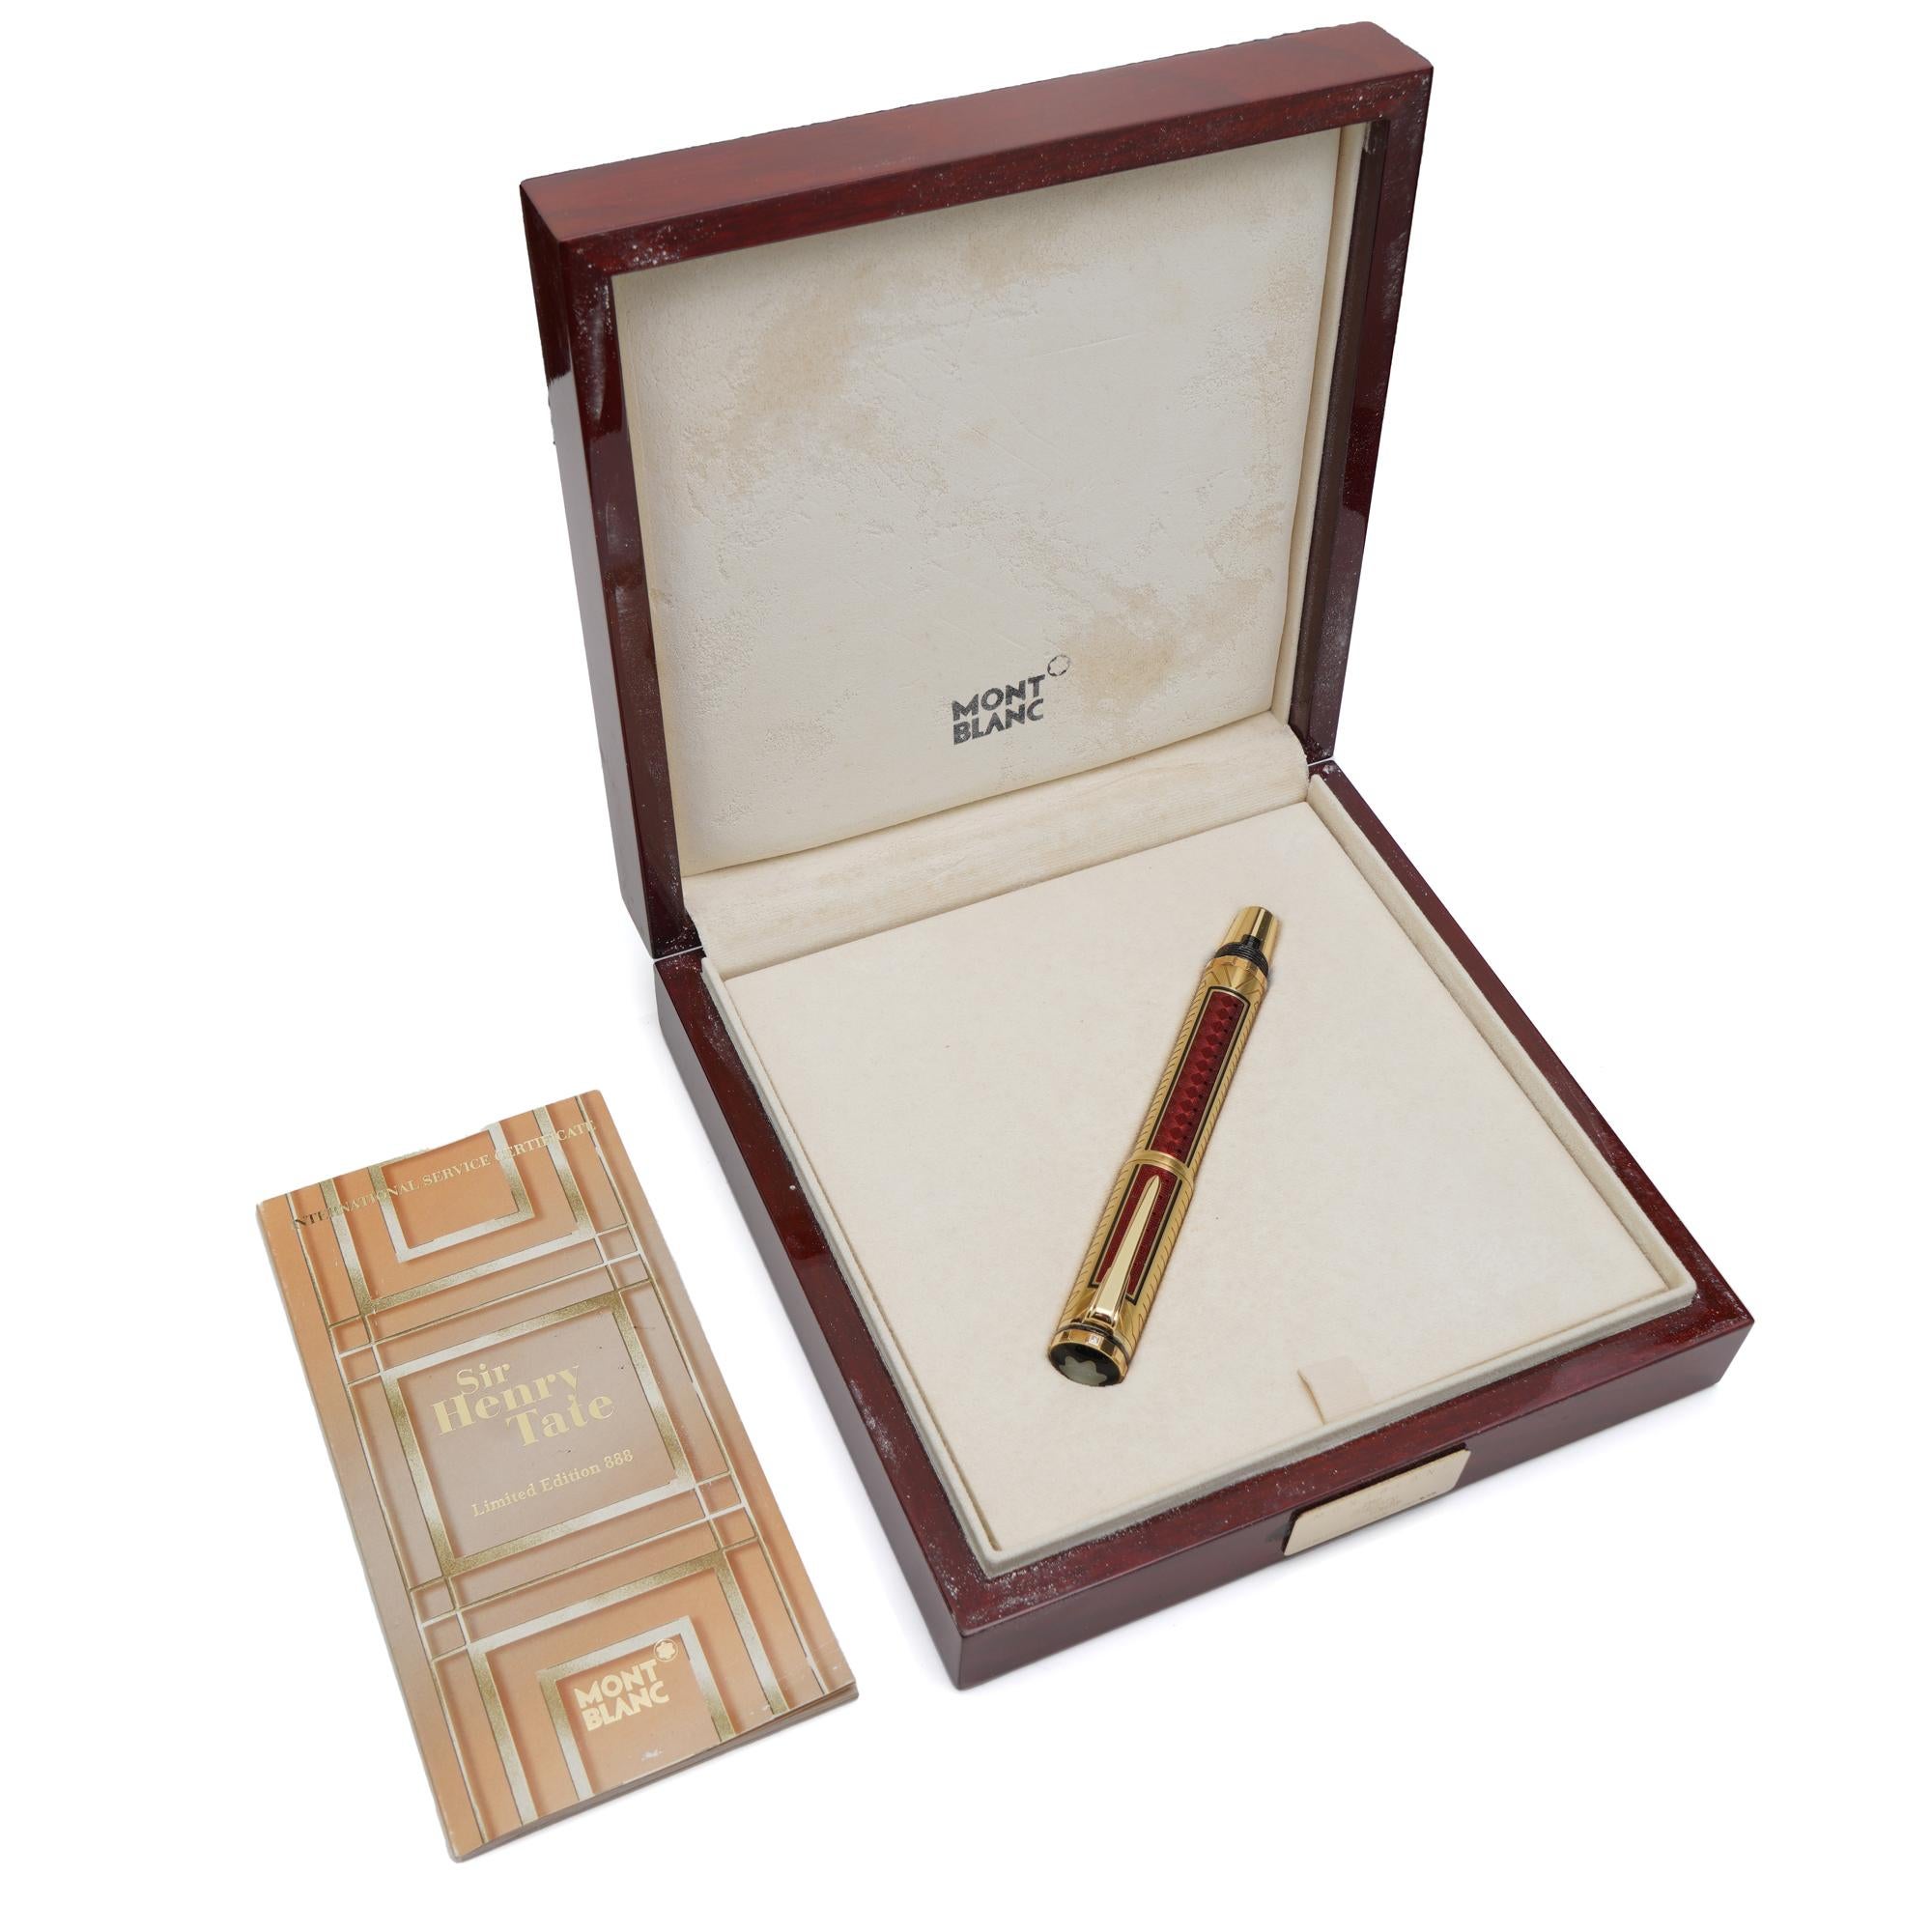 Montblanc, Piston Fountain Pen, Patron of the Art Sir Henry Tate 888 Limited For Sale 2